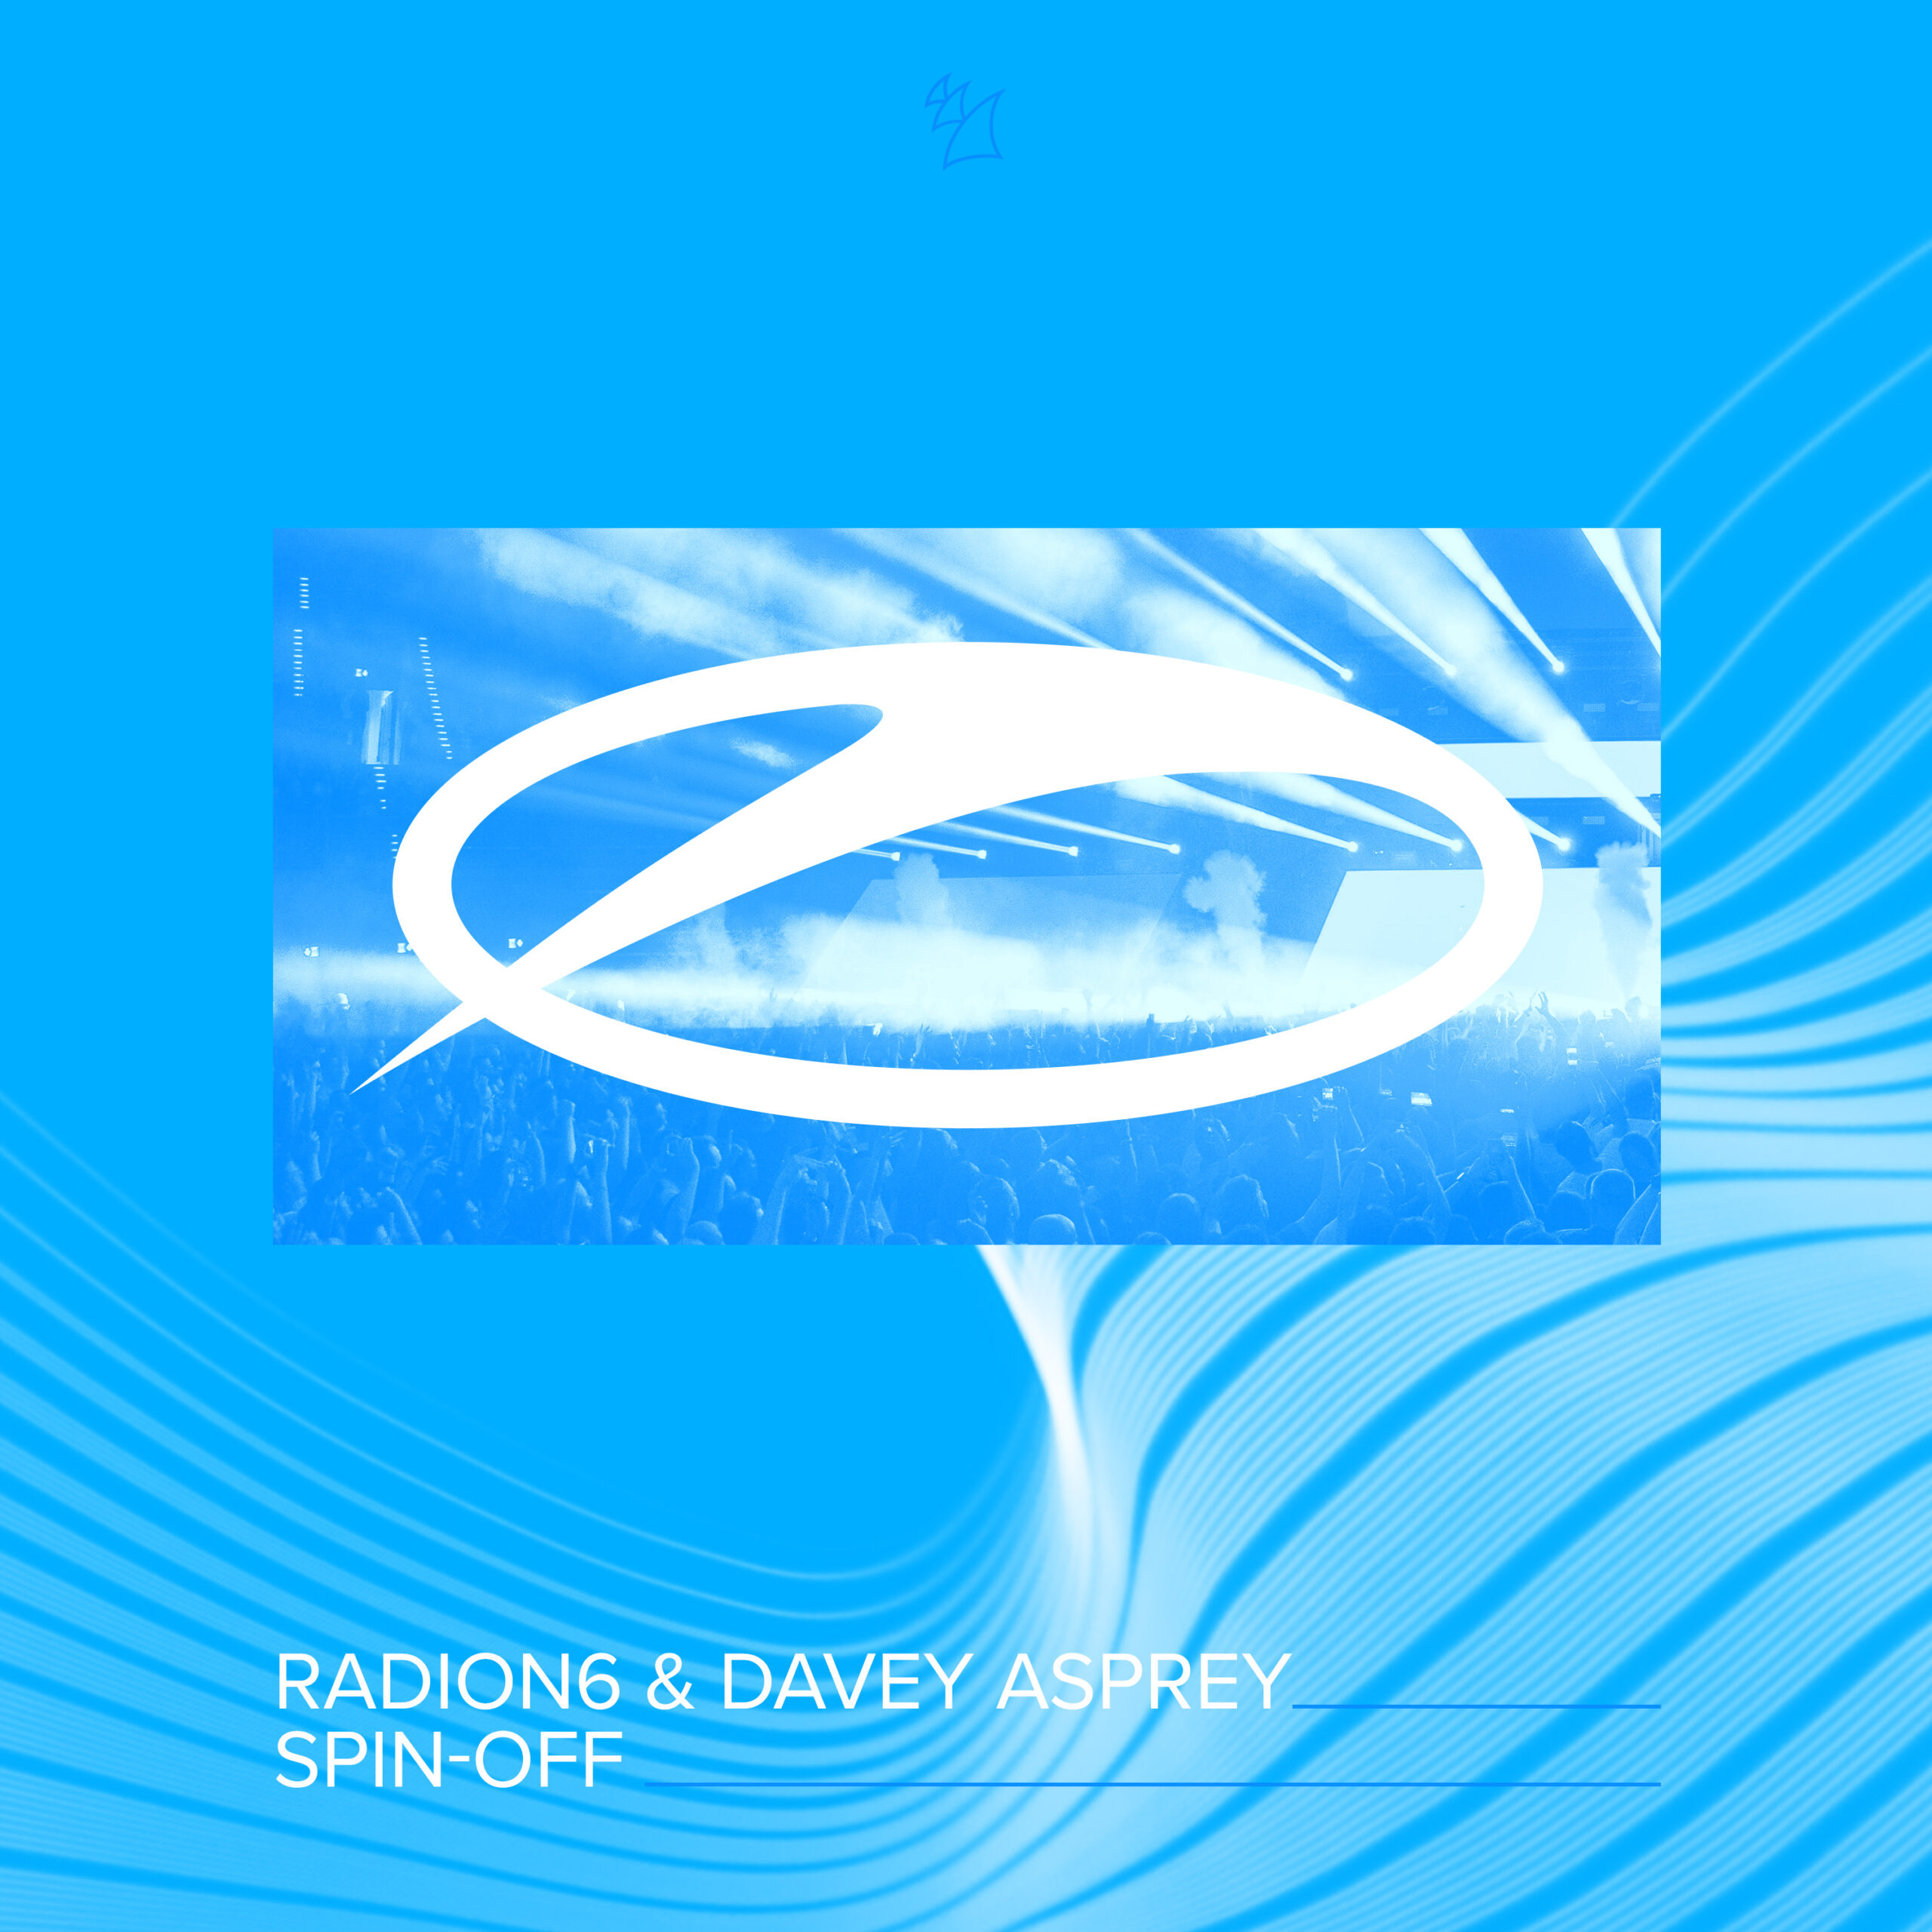 OUT NOW: RADION6 & DAVEY ASPREY – SPINN-OFF [A STATE OF TRANCE]